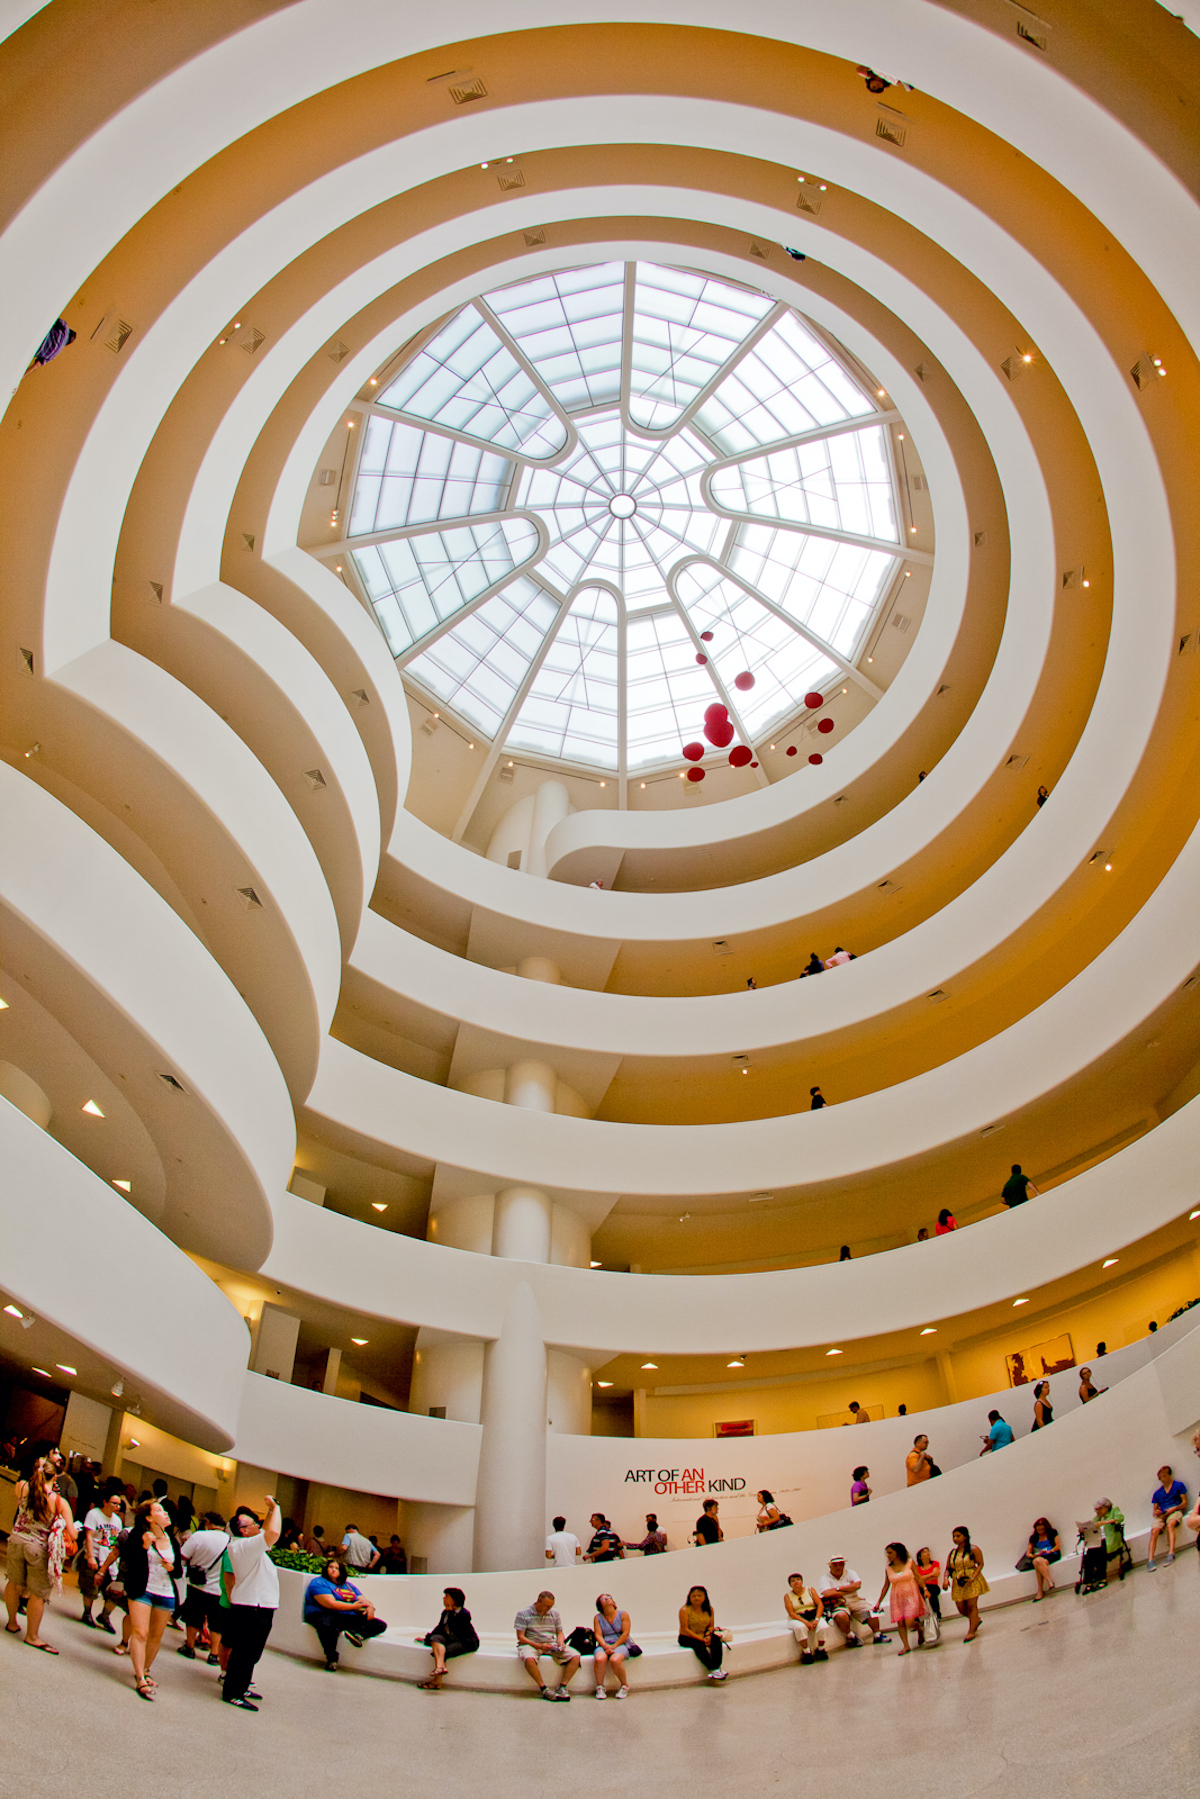 Large glass dome at the Guggenheim Museum in NYC with spiraled walkways beneath to lead people past the art on display